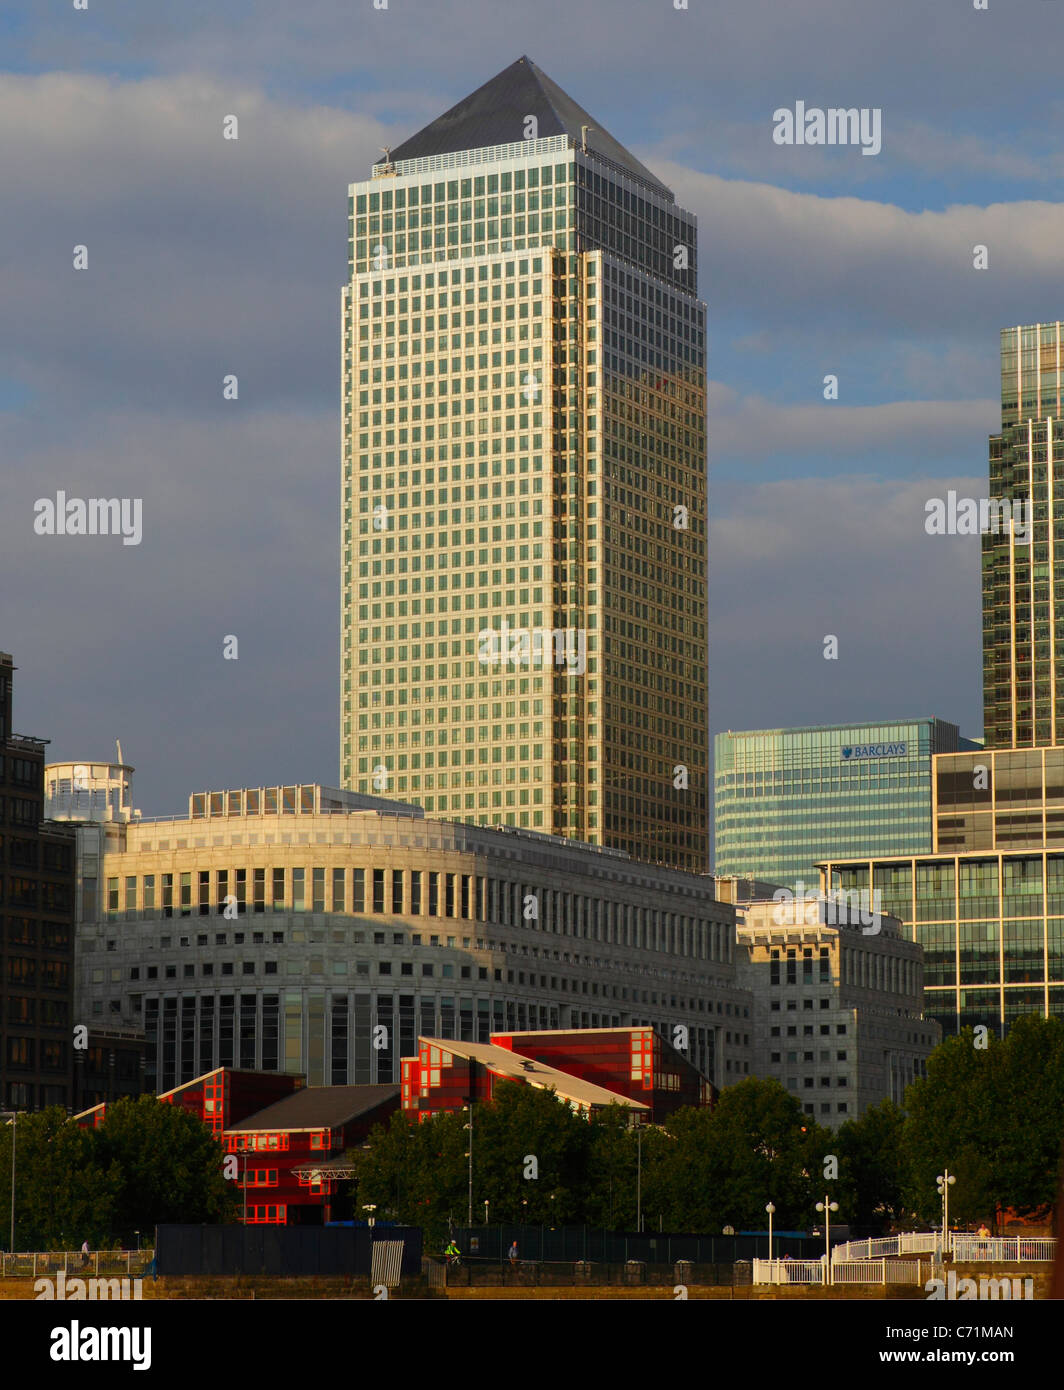 Canary Wharf Tower, Isle of Dogs, East London, England, UK, FR Banque D'Images